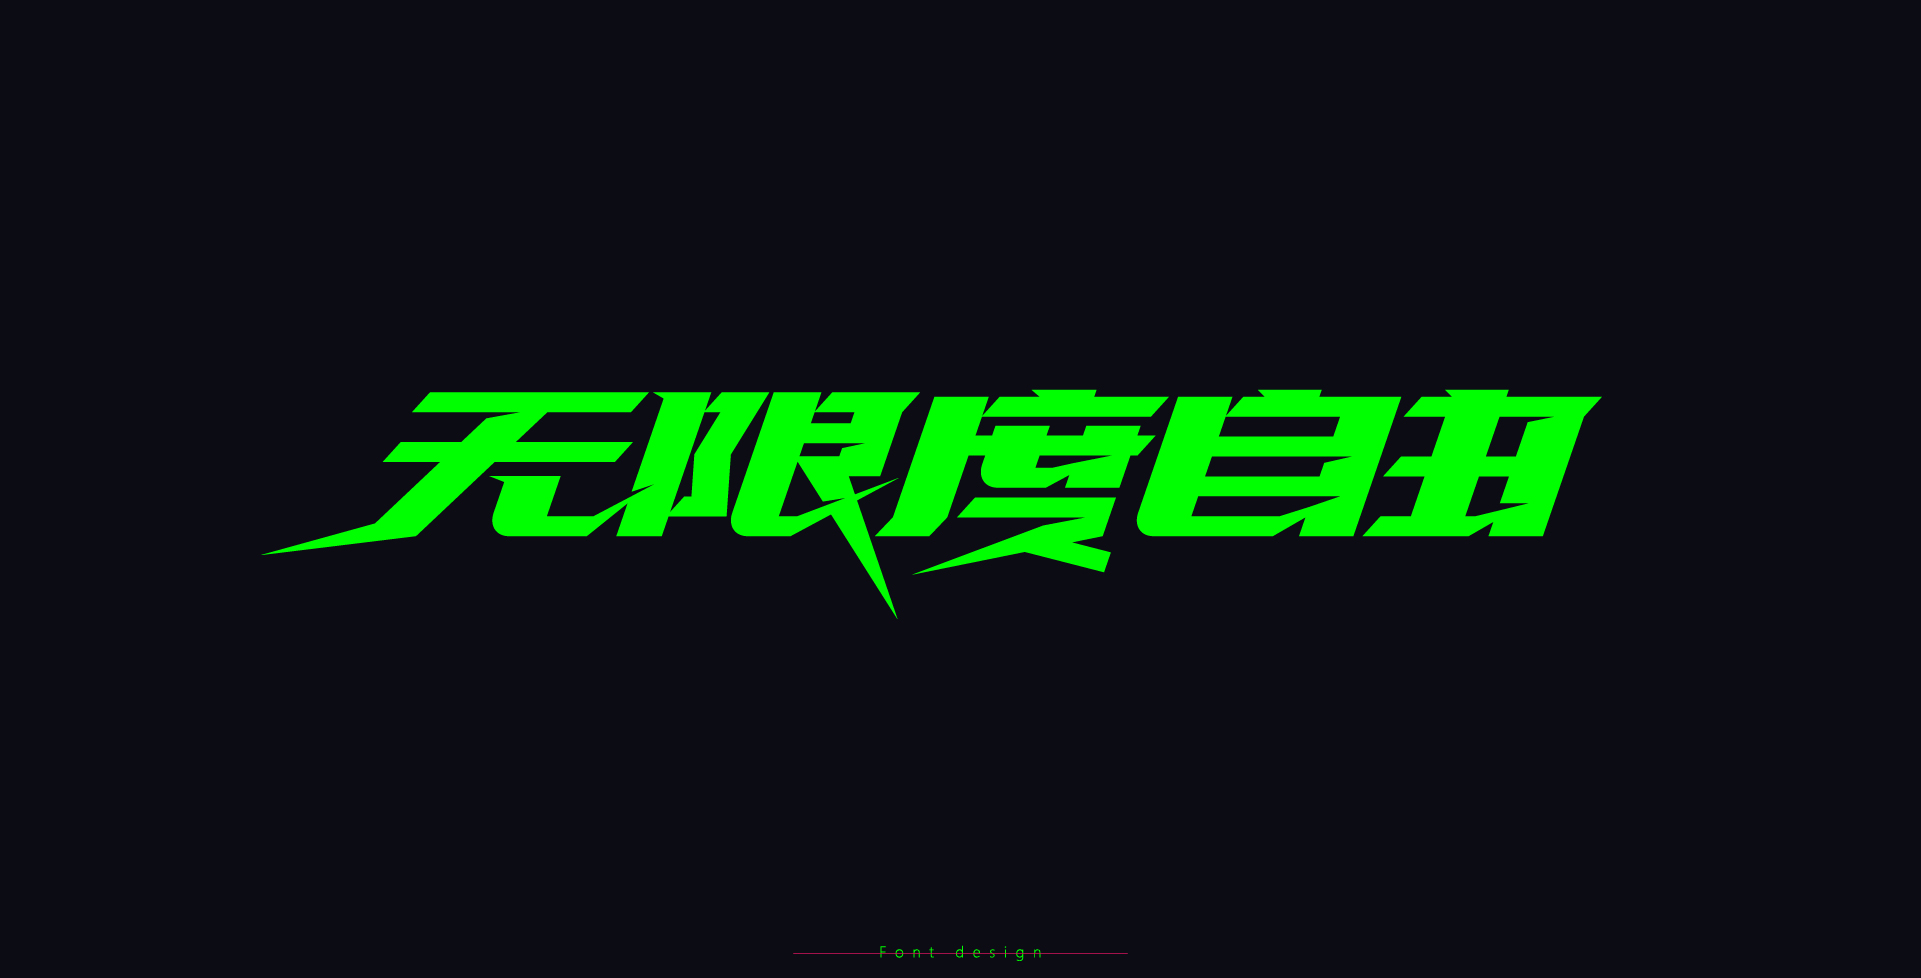 Standard font design with green as theme color